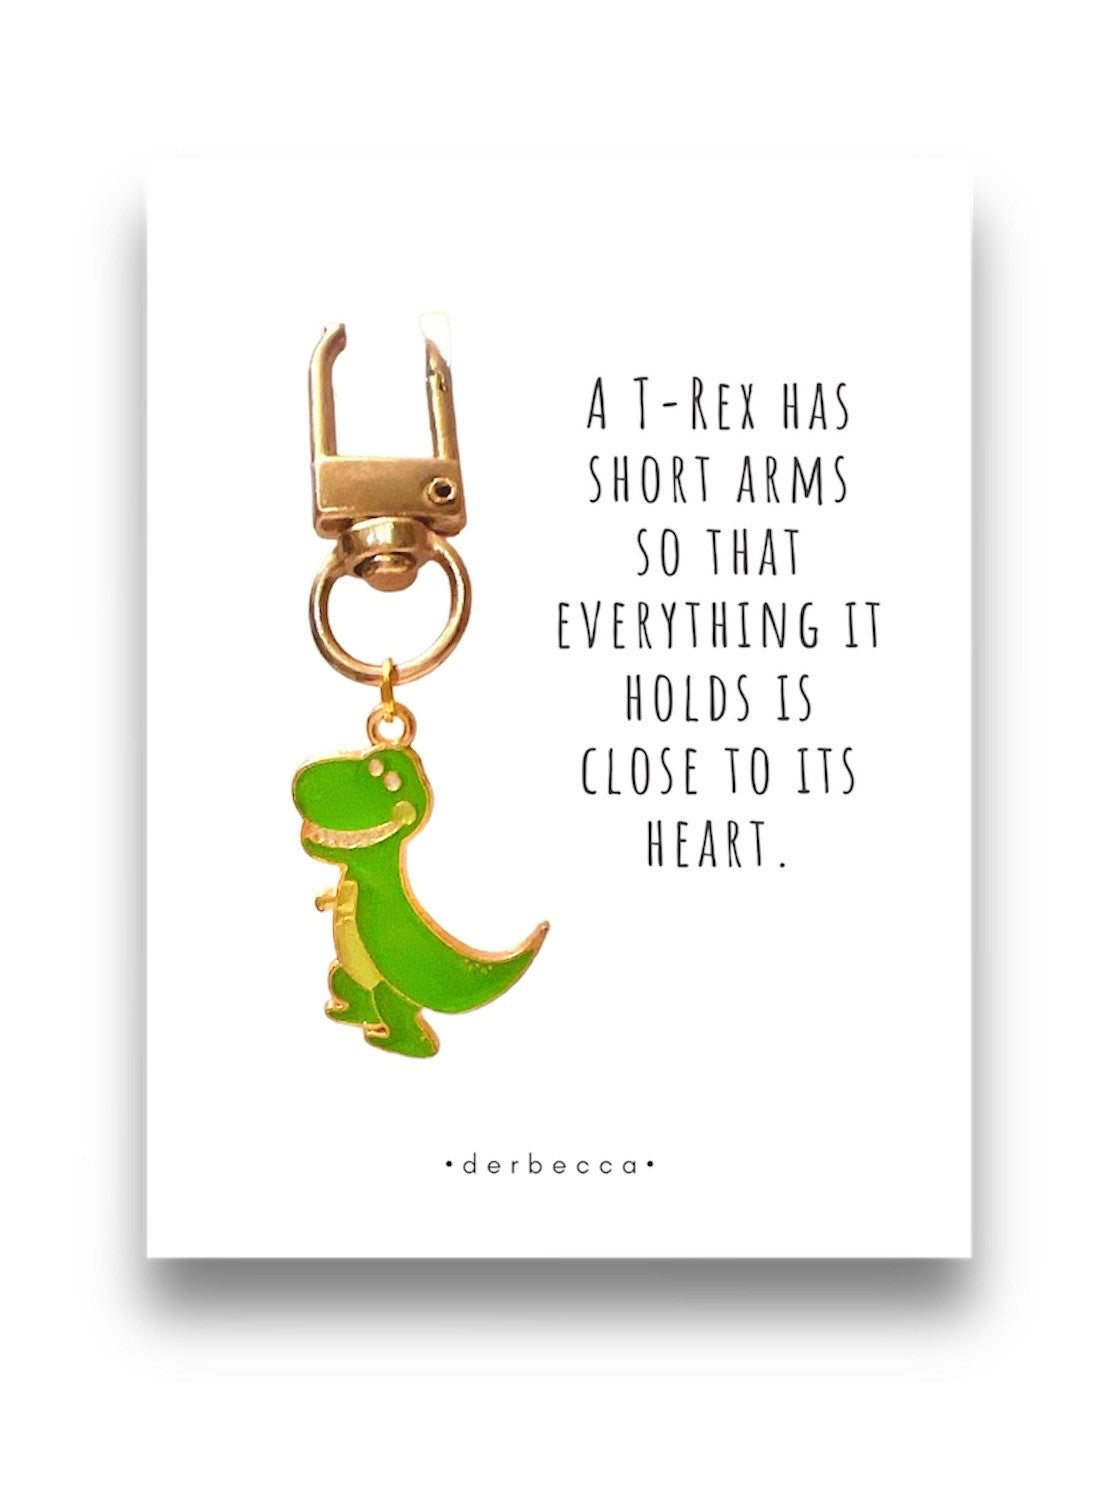 T-Rex Dinosaur Mini Keychain Charm Pendant, Bag Charm, Zipper Pull Accessory in green & yellow gold with a saying/verse card that reads: A T-Rex has short arms so that everything it holds is close to its heart.